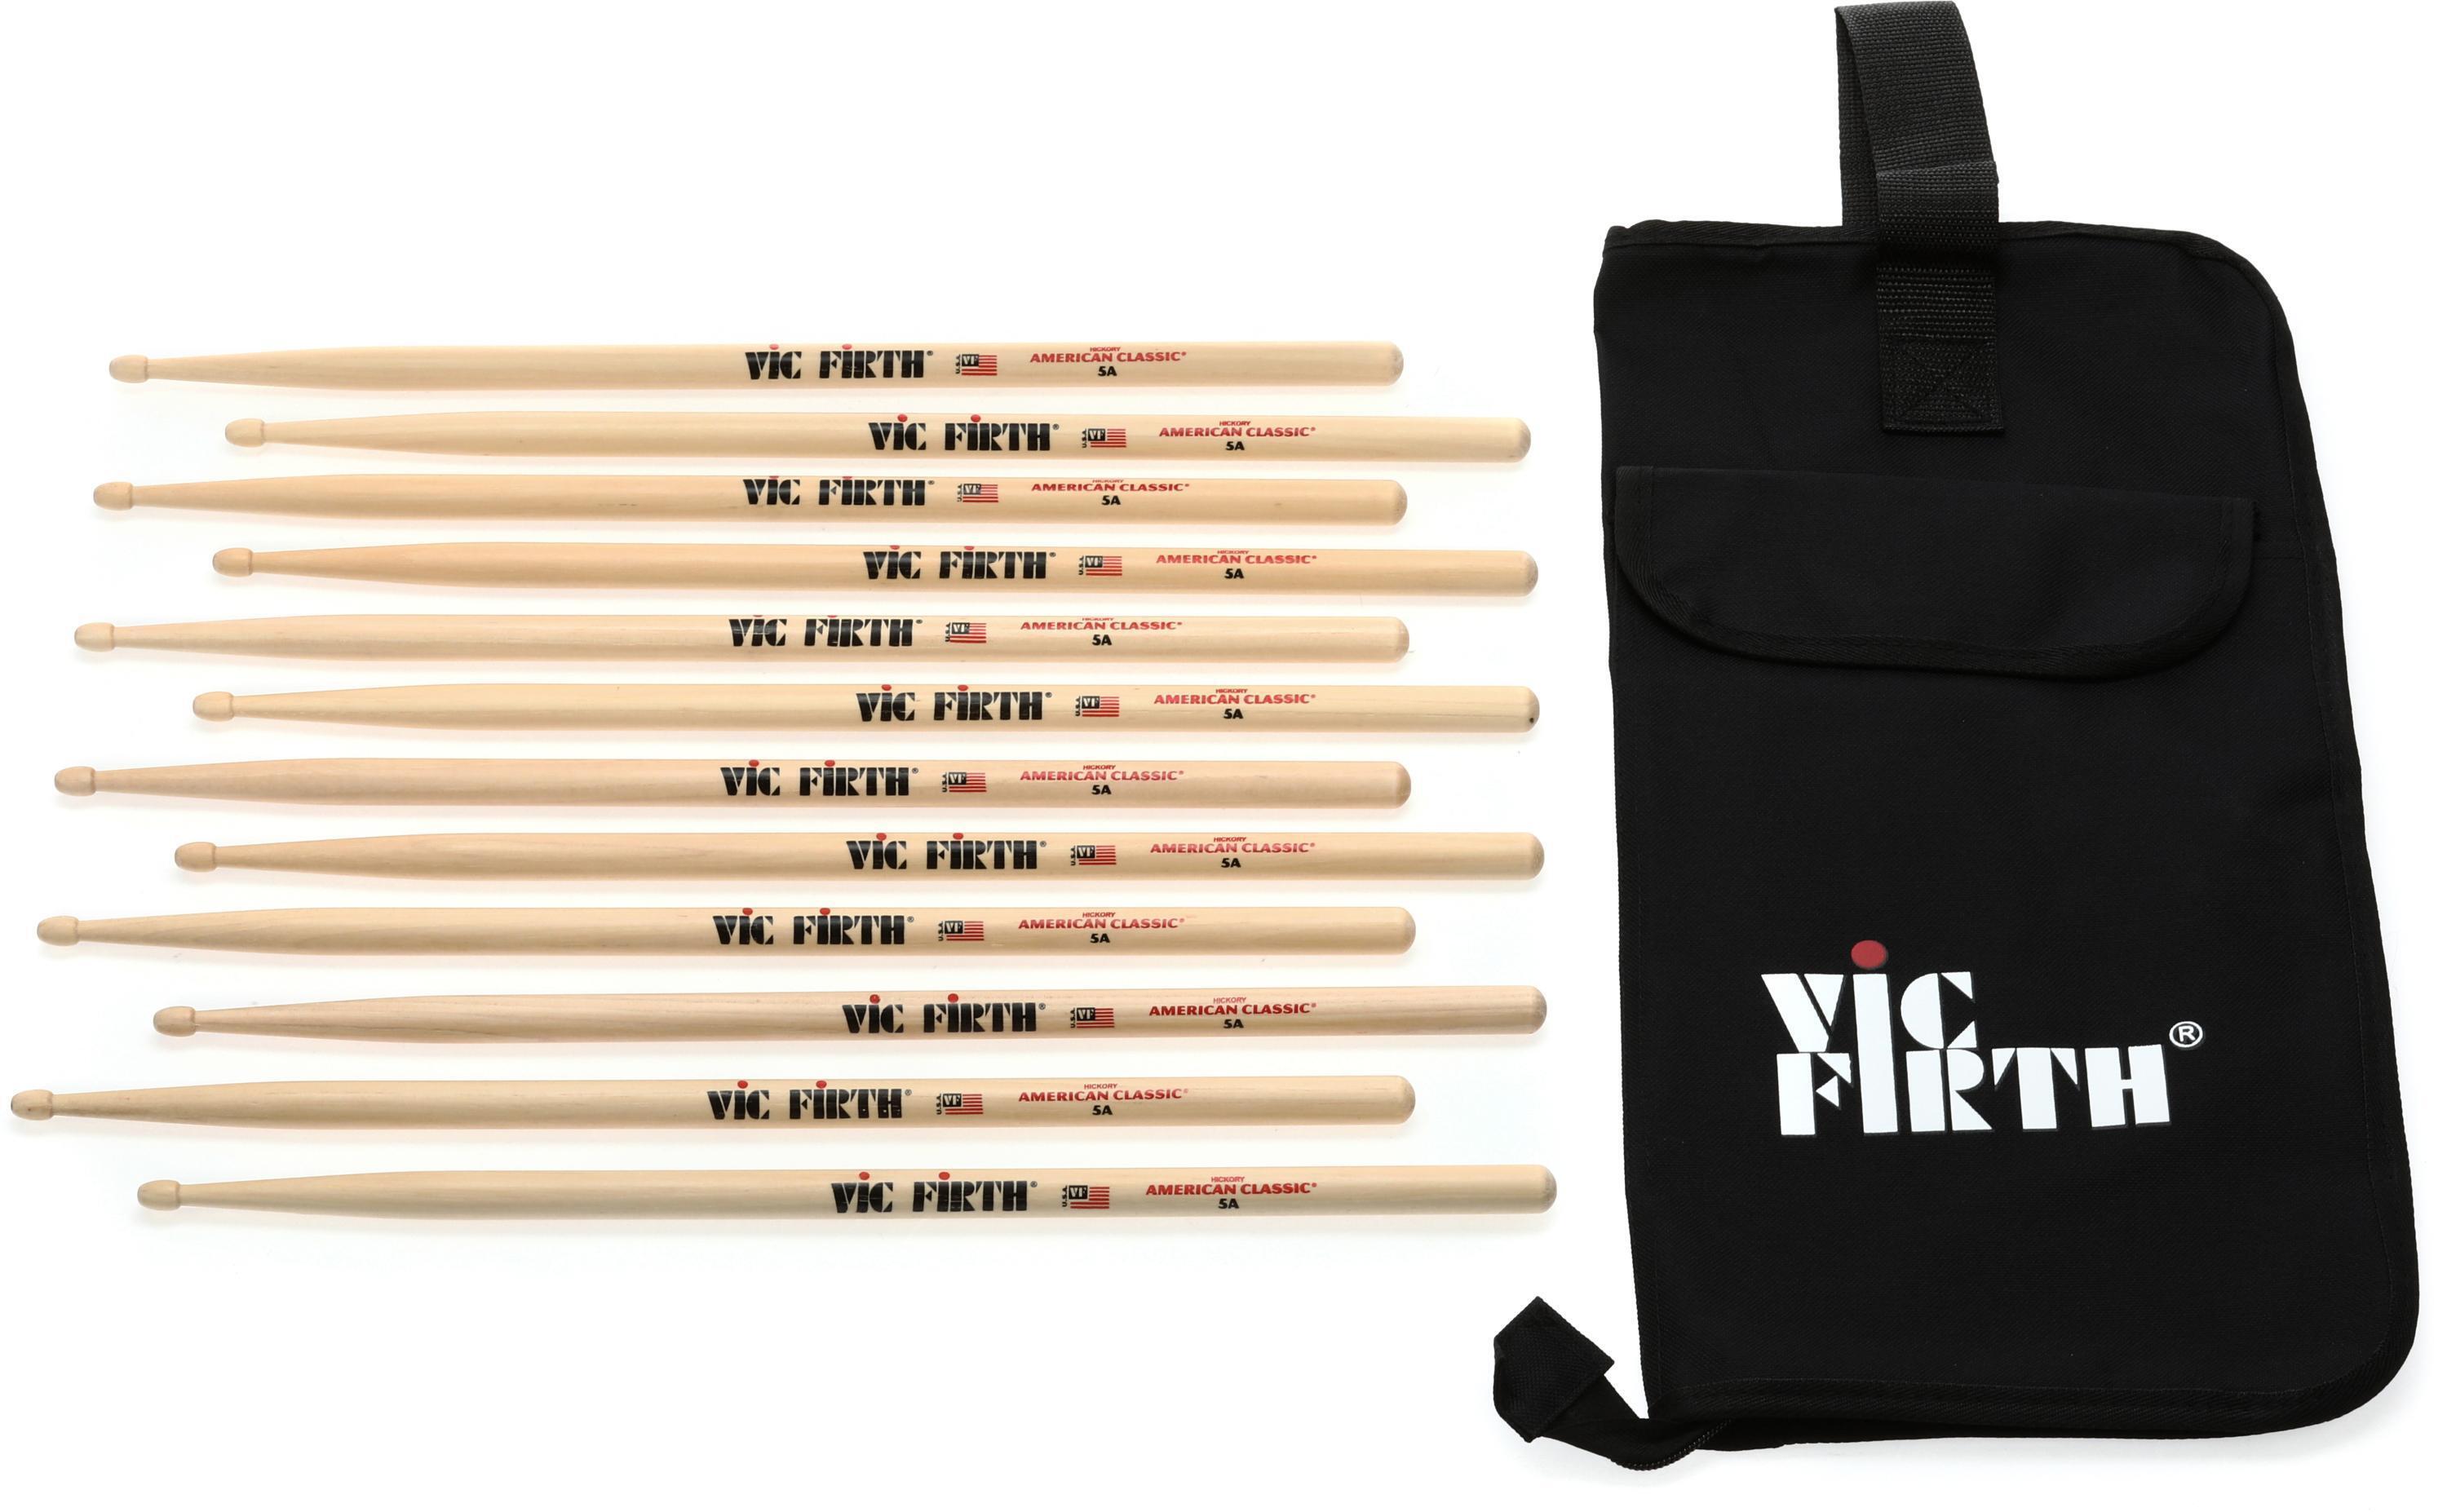 Vic Firth American Classic 5A Drumsticks Buy 3 Get 1 Free